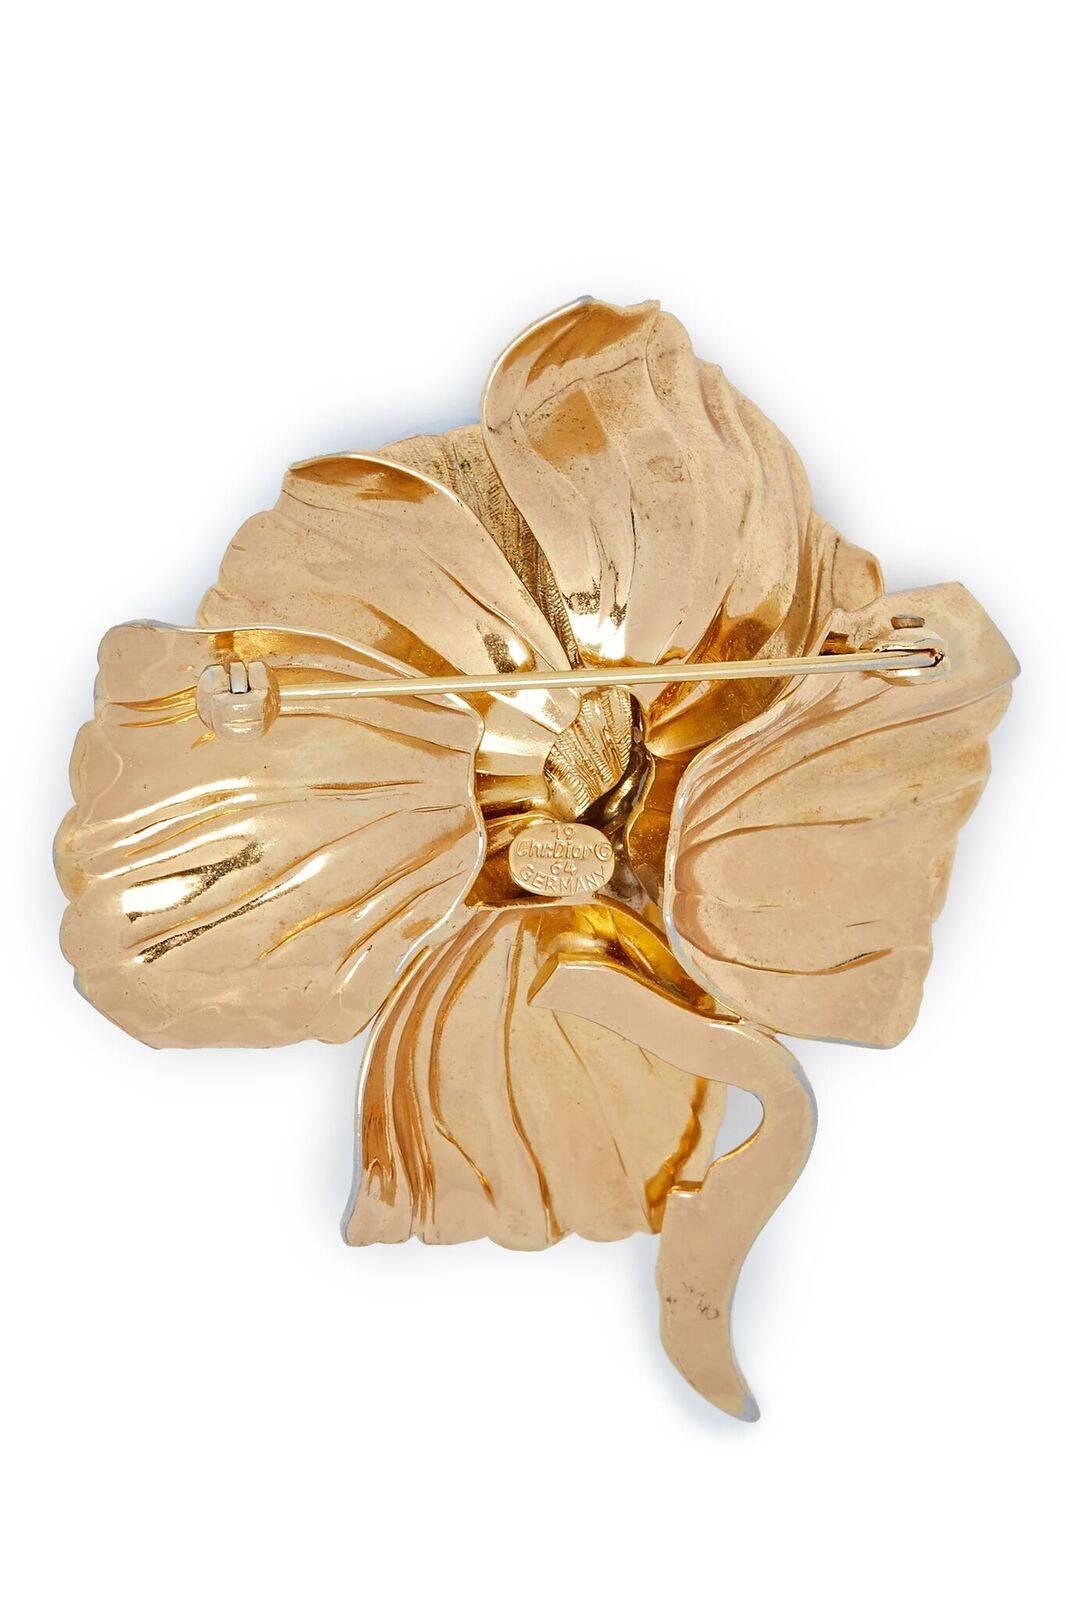 1964 Christian Dior gold tone sculpted rose design brooch with C pin fastening.  This piece is marked 1964 on the cartouche on the rear. This brooch was a classic design and was reproduced many times by the factory Henkel & Grosse for Dior.

In